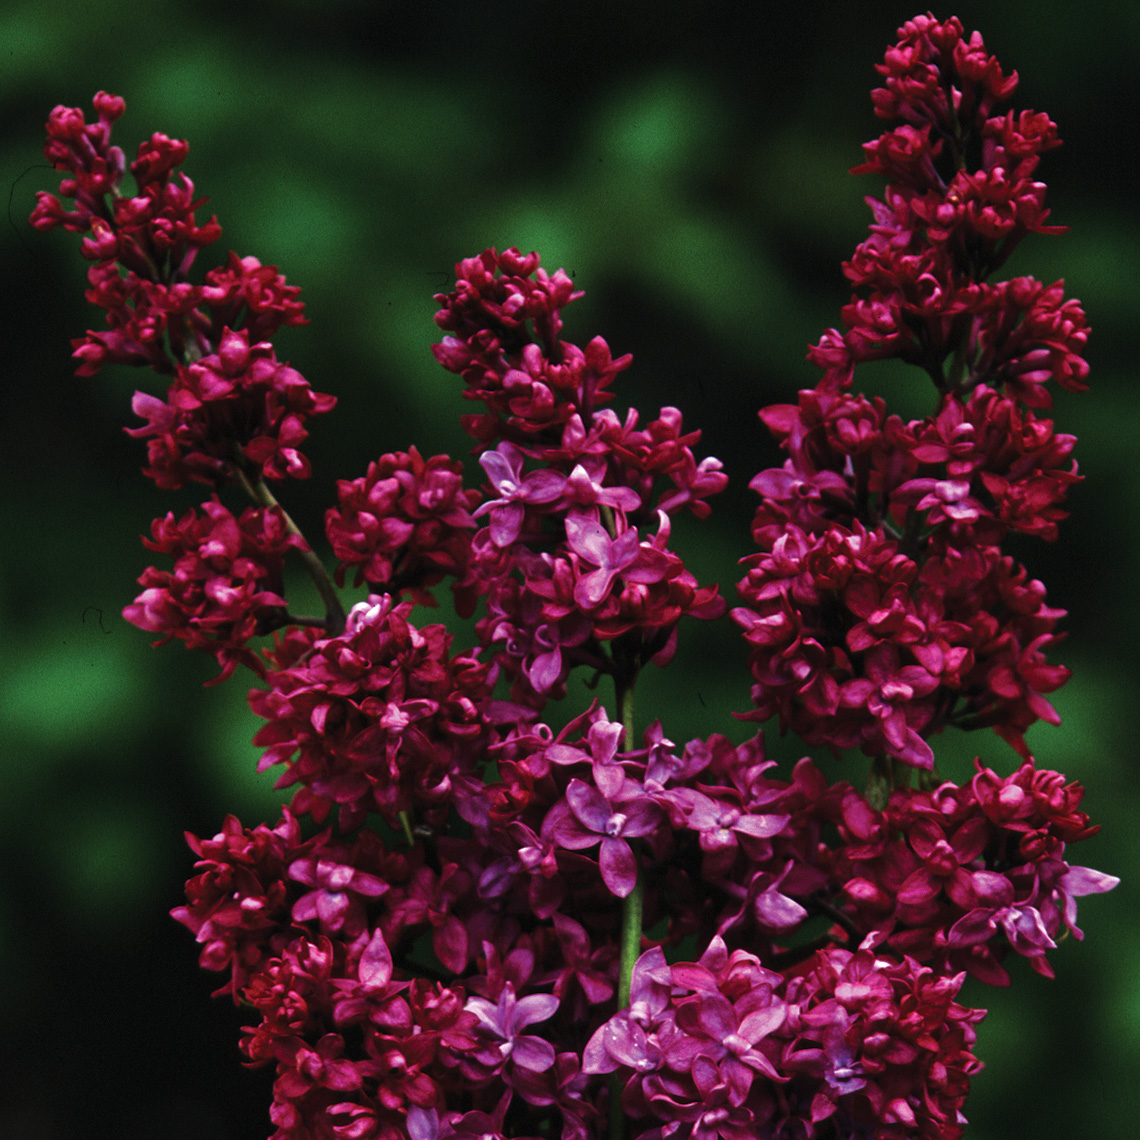 Flowers of Royal Purple lilac displaying a deep red purple color